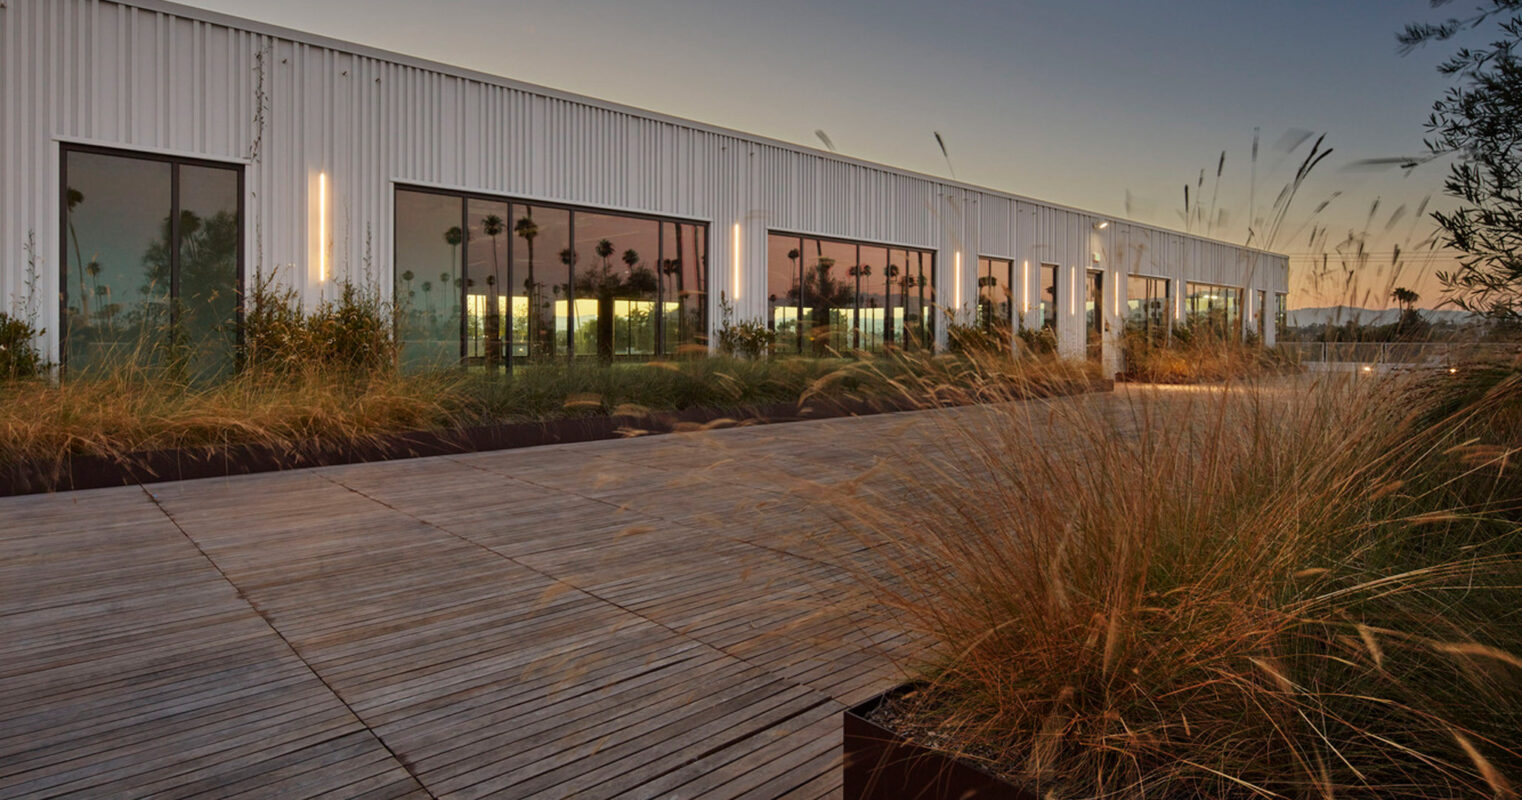 Contemporary single-story building with a reflective metal facade and expansive glass windows at dusk, featuring an elevated wooden deck surrounded by tall grasses in a natural landscape setting.